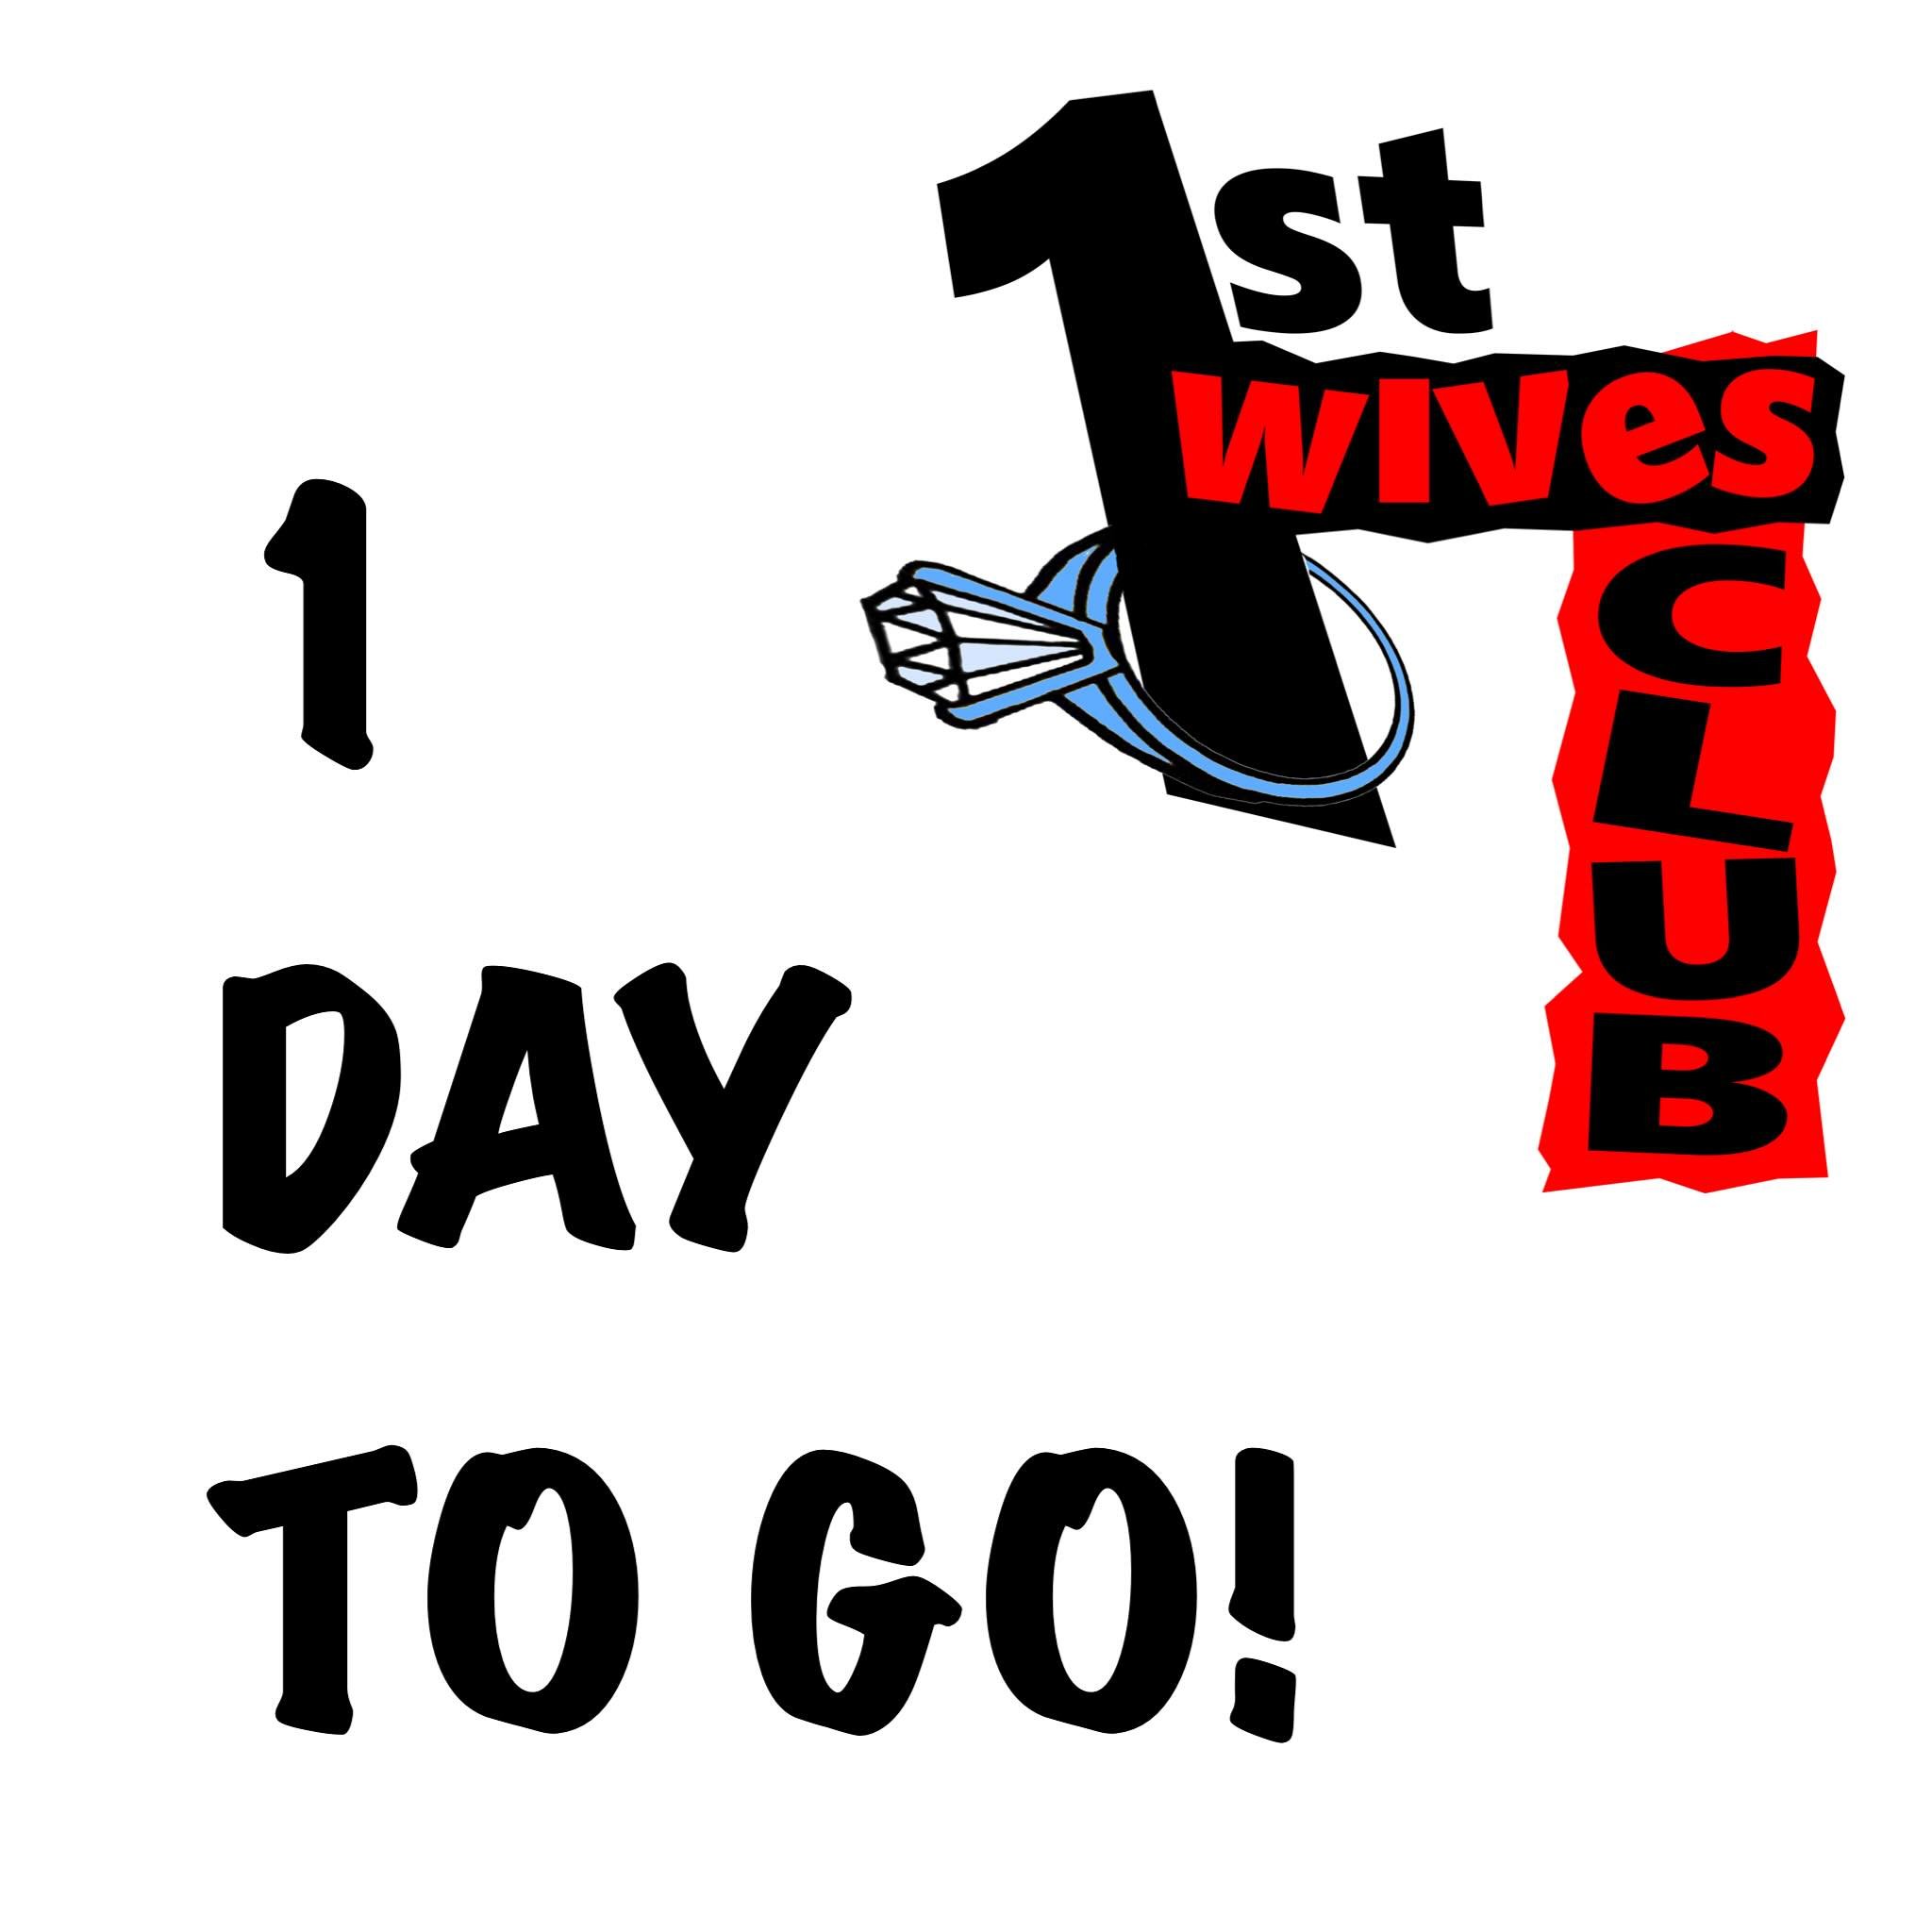 1 DAY TO GO!! Until our next interactive film screening THE FIRST WIVES CLUB Fri 19th April 2024 at @visitfeelgoodclub Tickets selling fast, link in bio, queens!